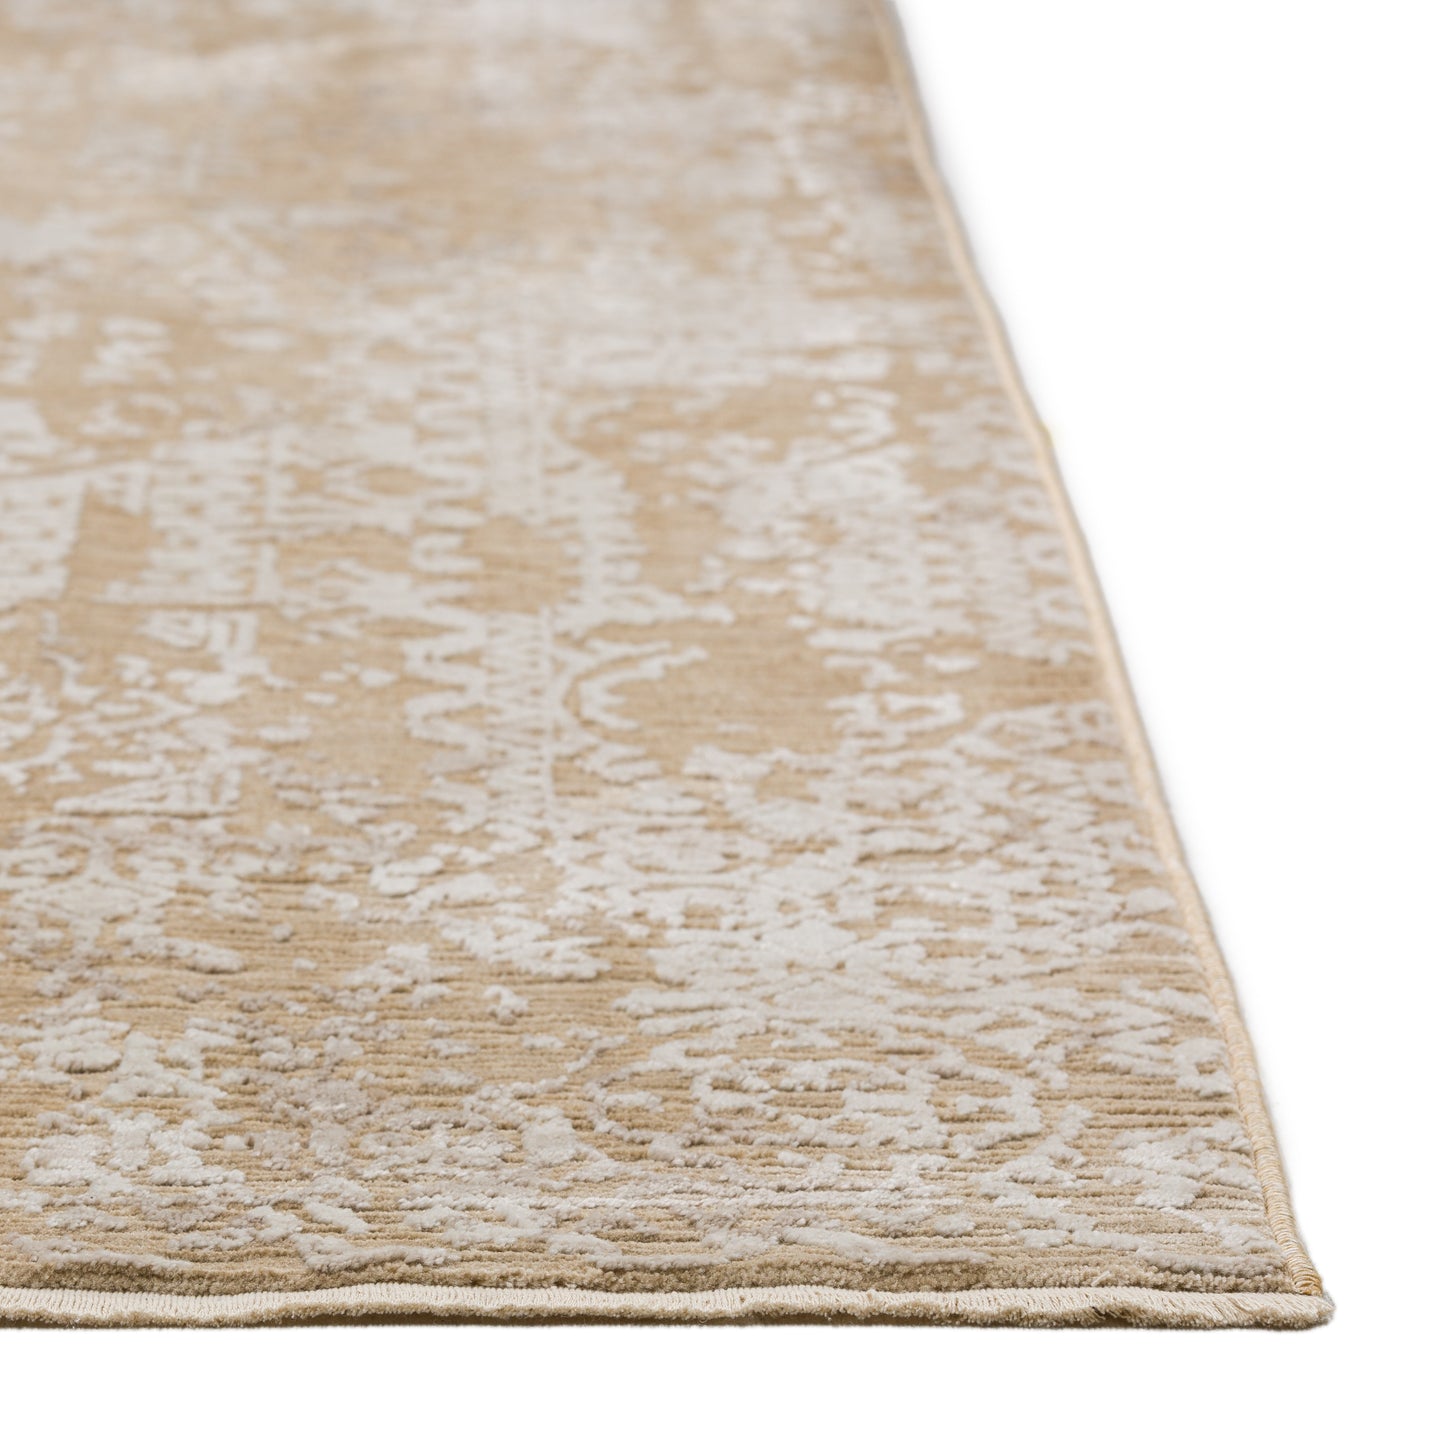 Antalya AY3 Machine Woven Synthetic Blend Indoor Area Rug by Dalyn Rugs